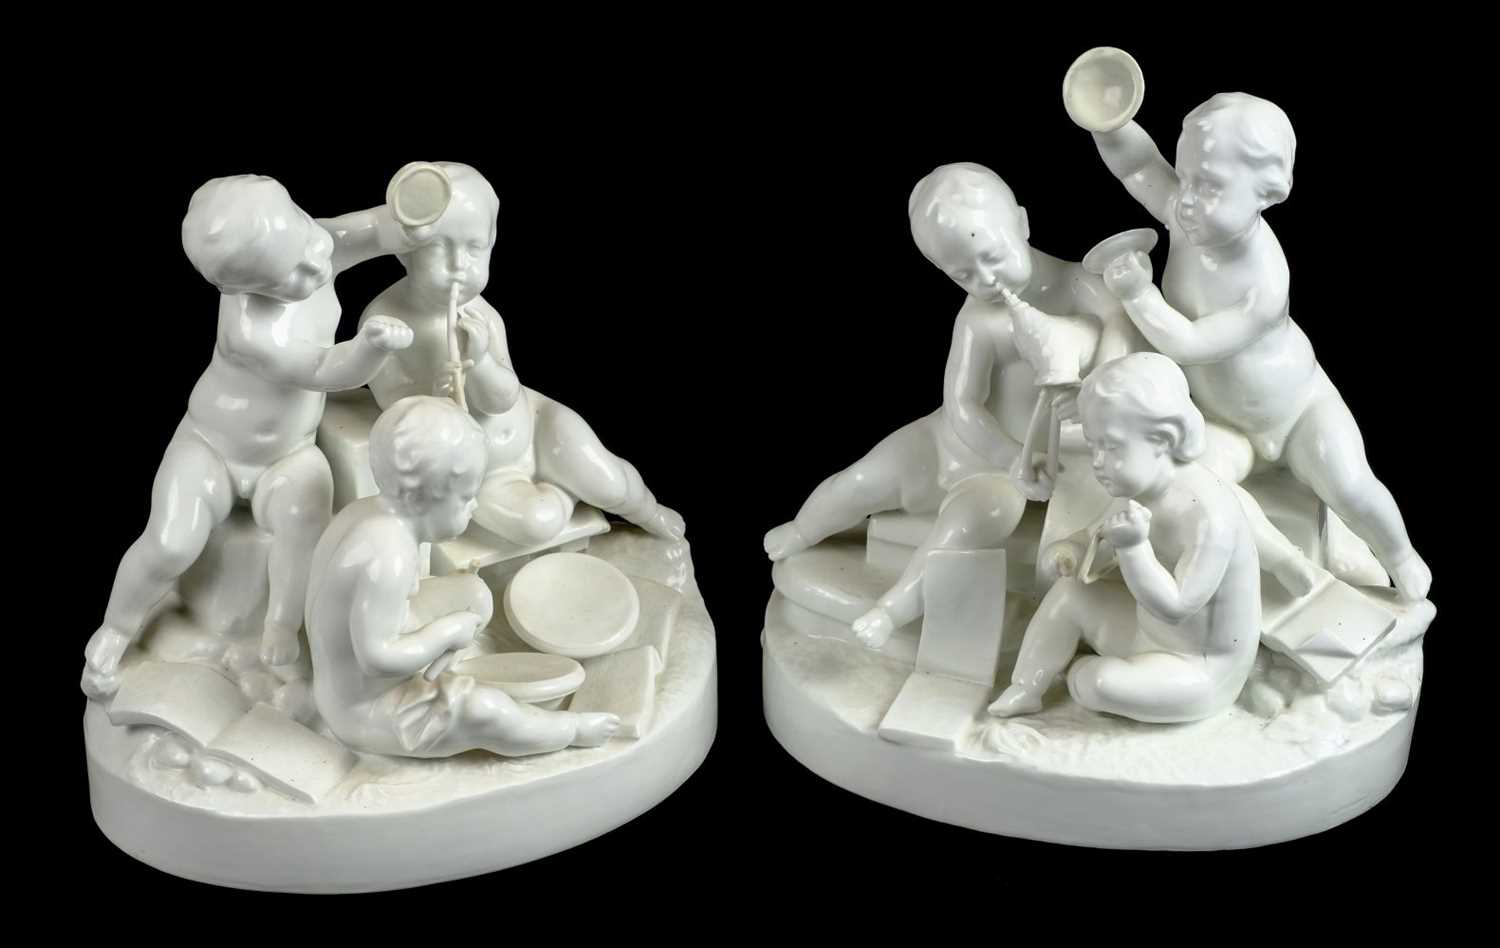 Lot 86 - Figural Group. A pair of 19th century French porcelain figures by Jean Gille, Paris circa 1860s